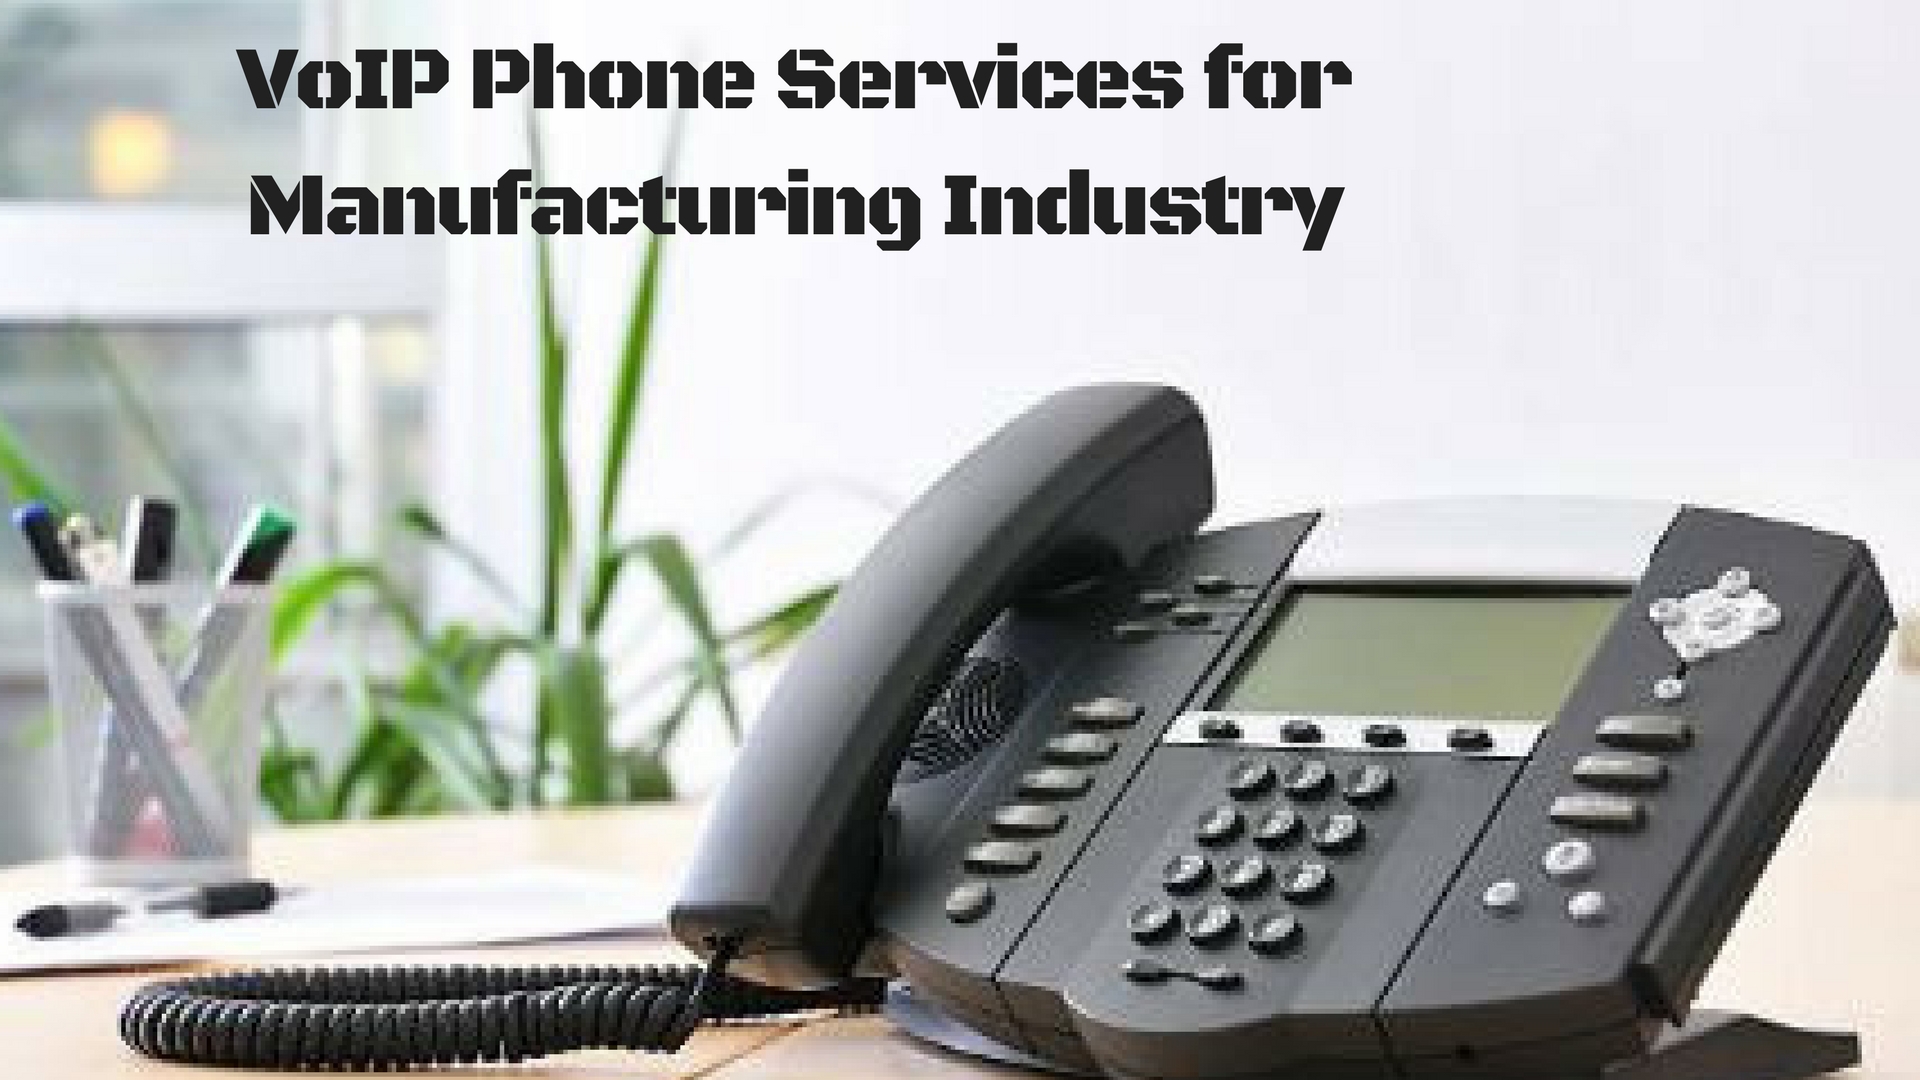 VoIP Phone Services for Manufacturing Industry